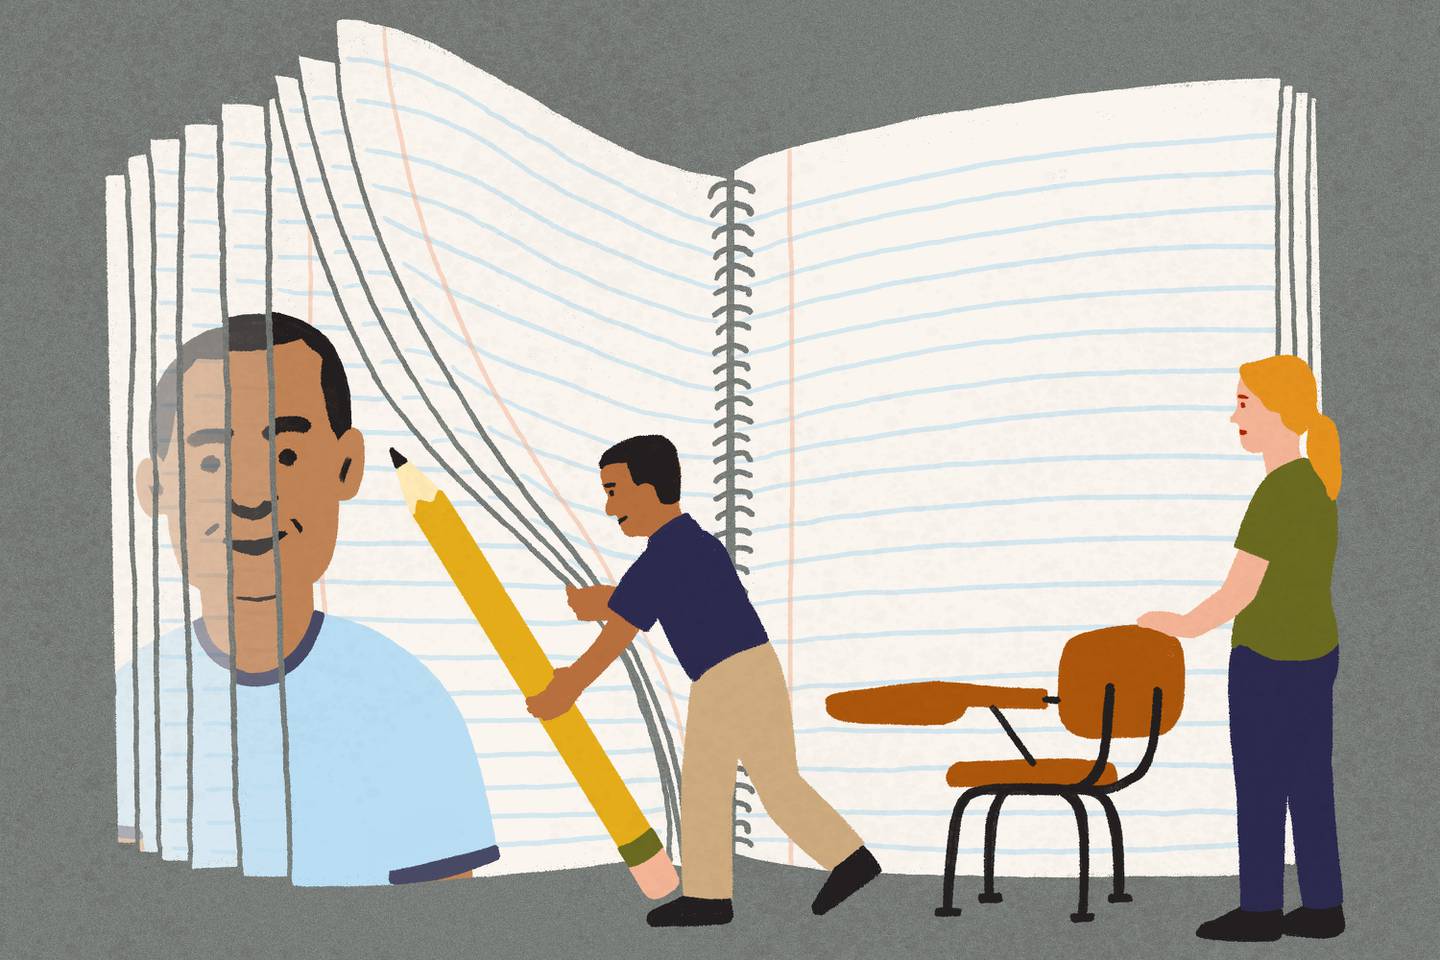 Illustration of Black student pulling back the pages of a notebook to look at fading portrait of his friend, while behind him his white teacher watches.